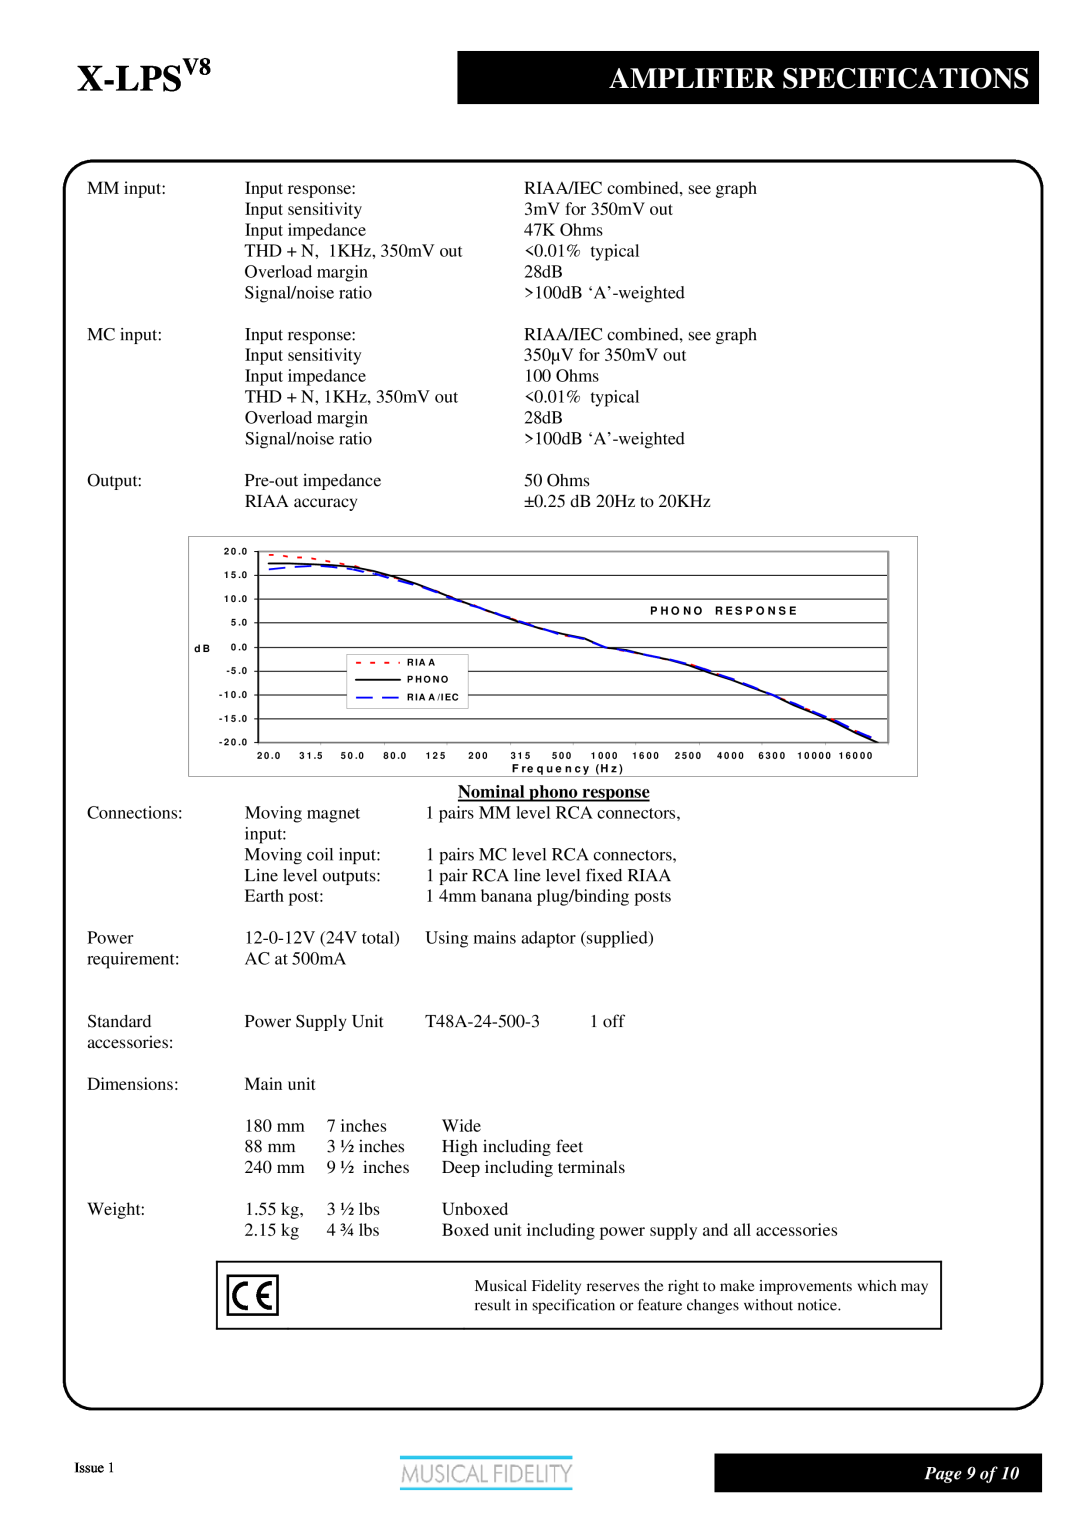 Musical Fidelity X-LPSV8 manual Amplifier Specifications, Nominal phono response, Page 9 of 